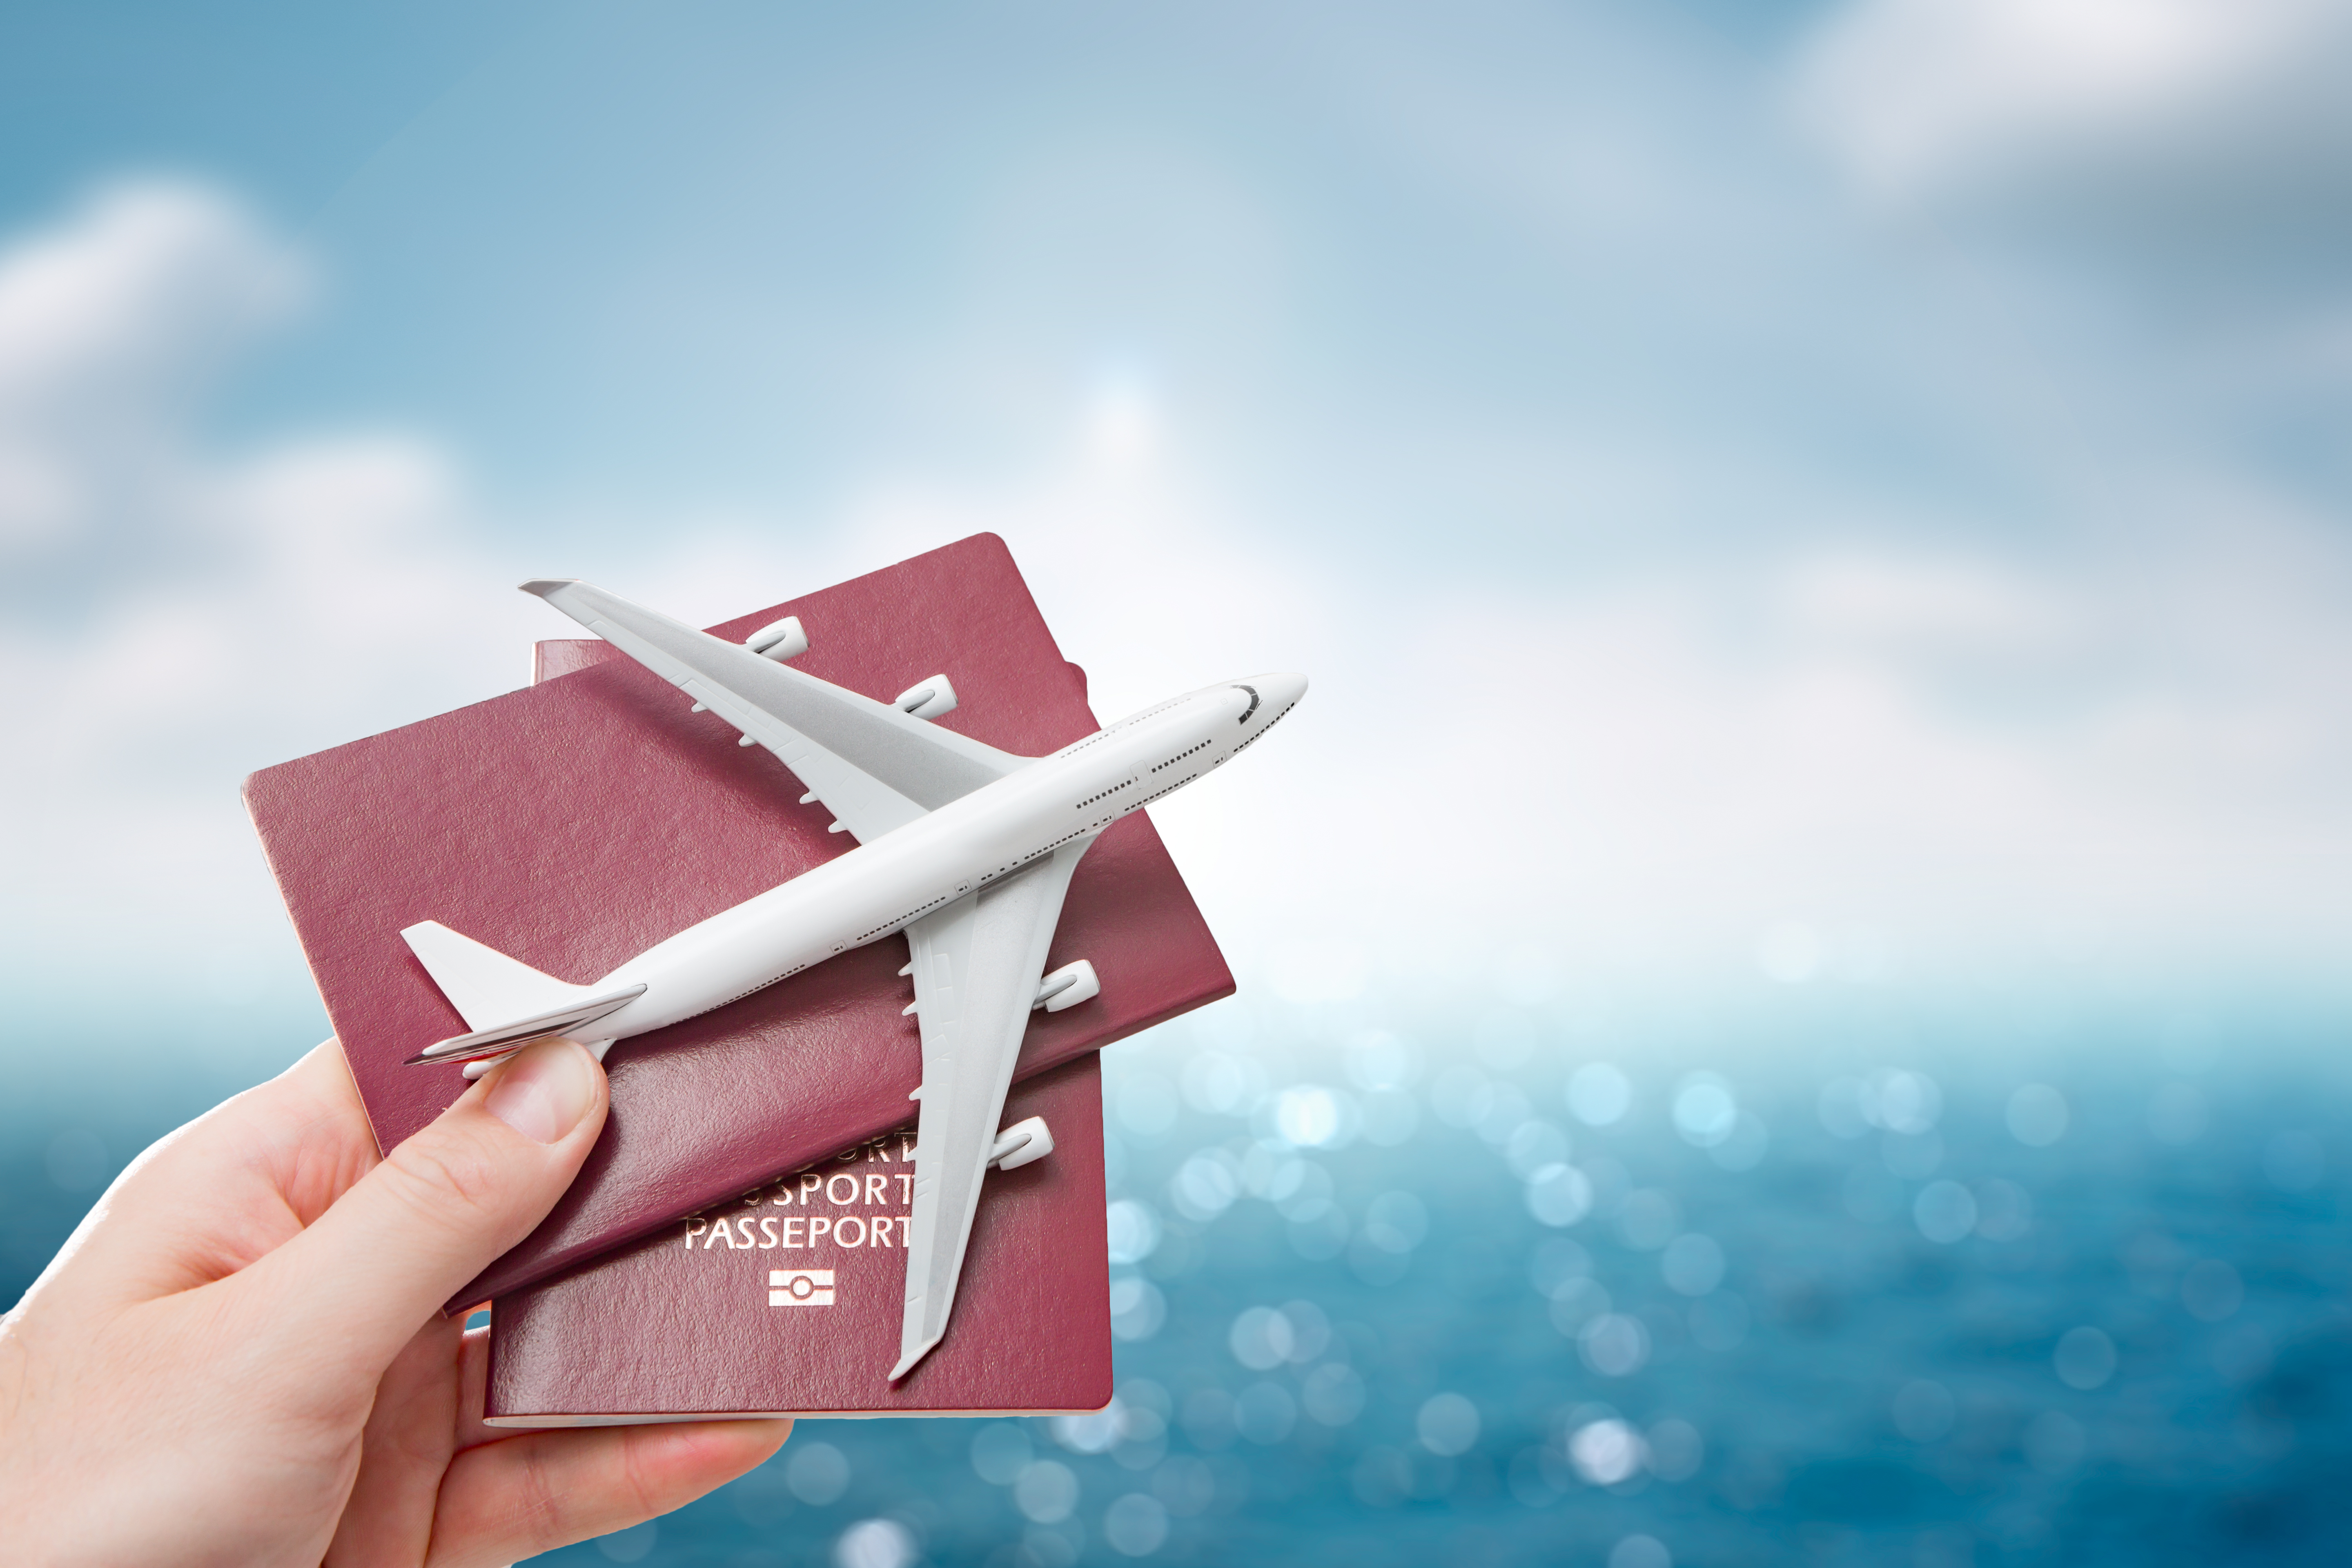 A person holding a toy airplane with a passport | Source: Shutterstock